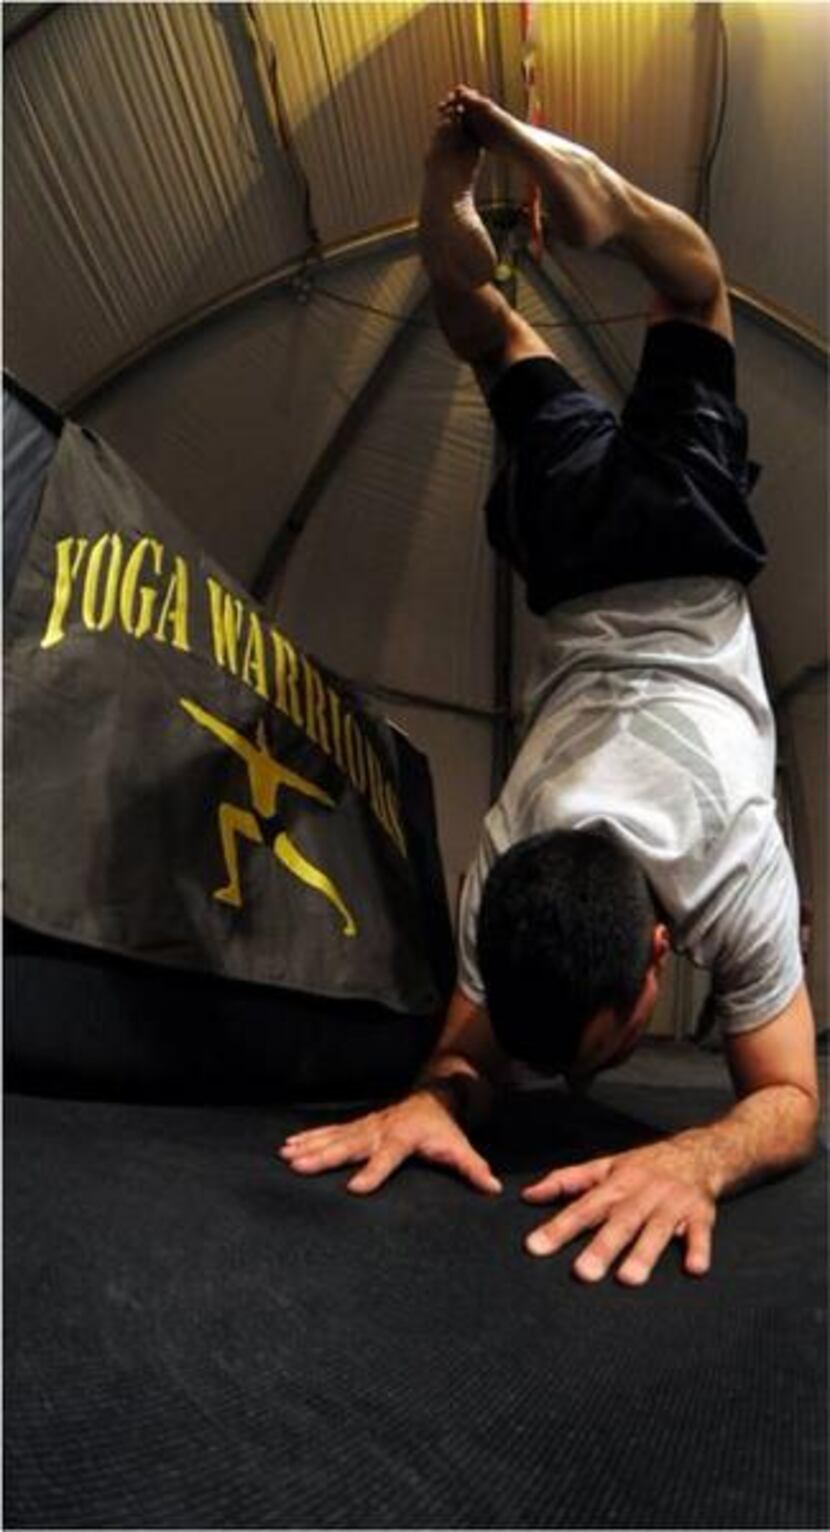 
Jon Greuel partnered with organization Yoga Warriors to further learn how to do and teach...